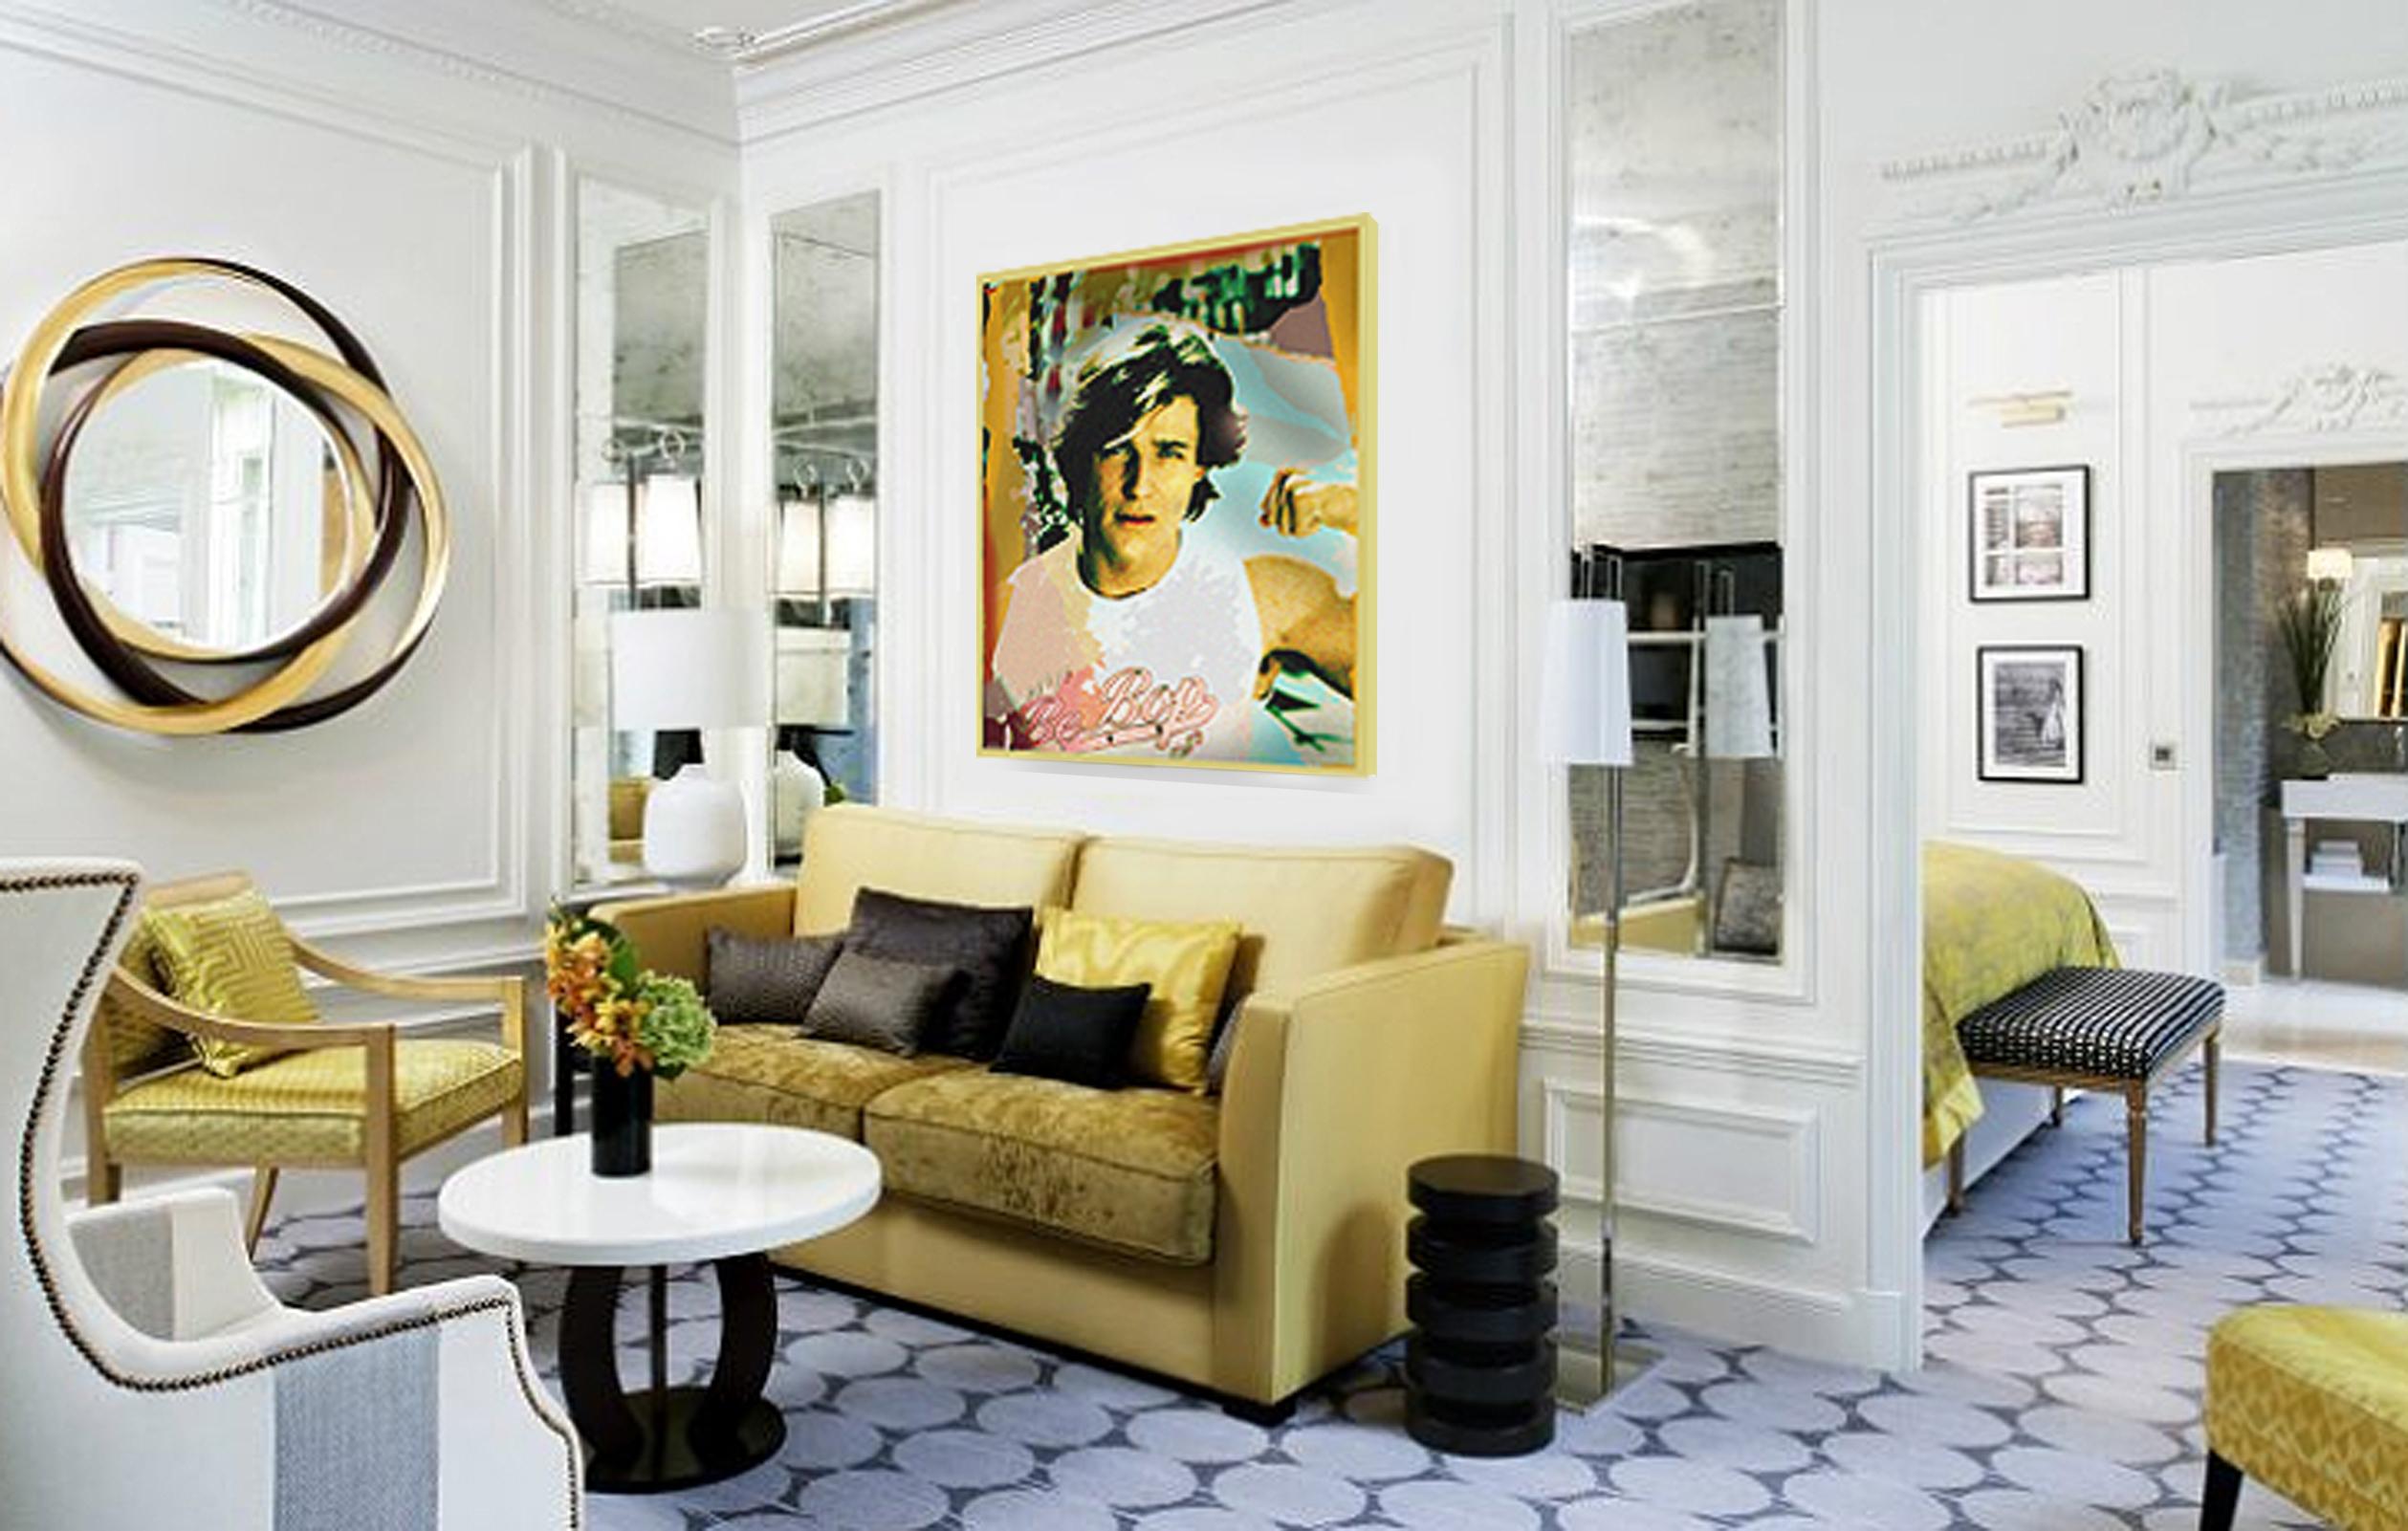 Michael Pare' Beverly Hills 2 (...a large canvas edition; see other sizes below) - Photograph by Gary Bernstein